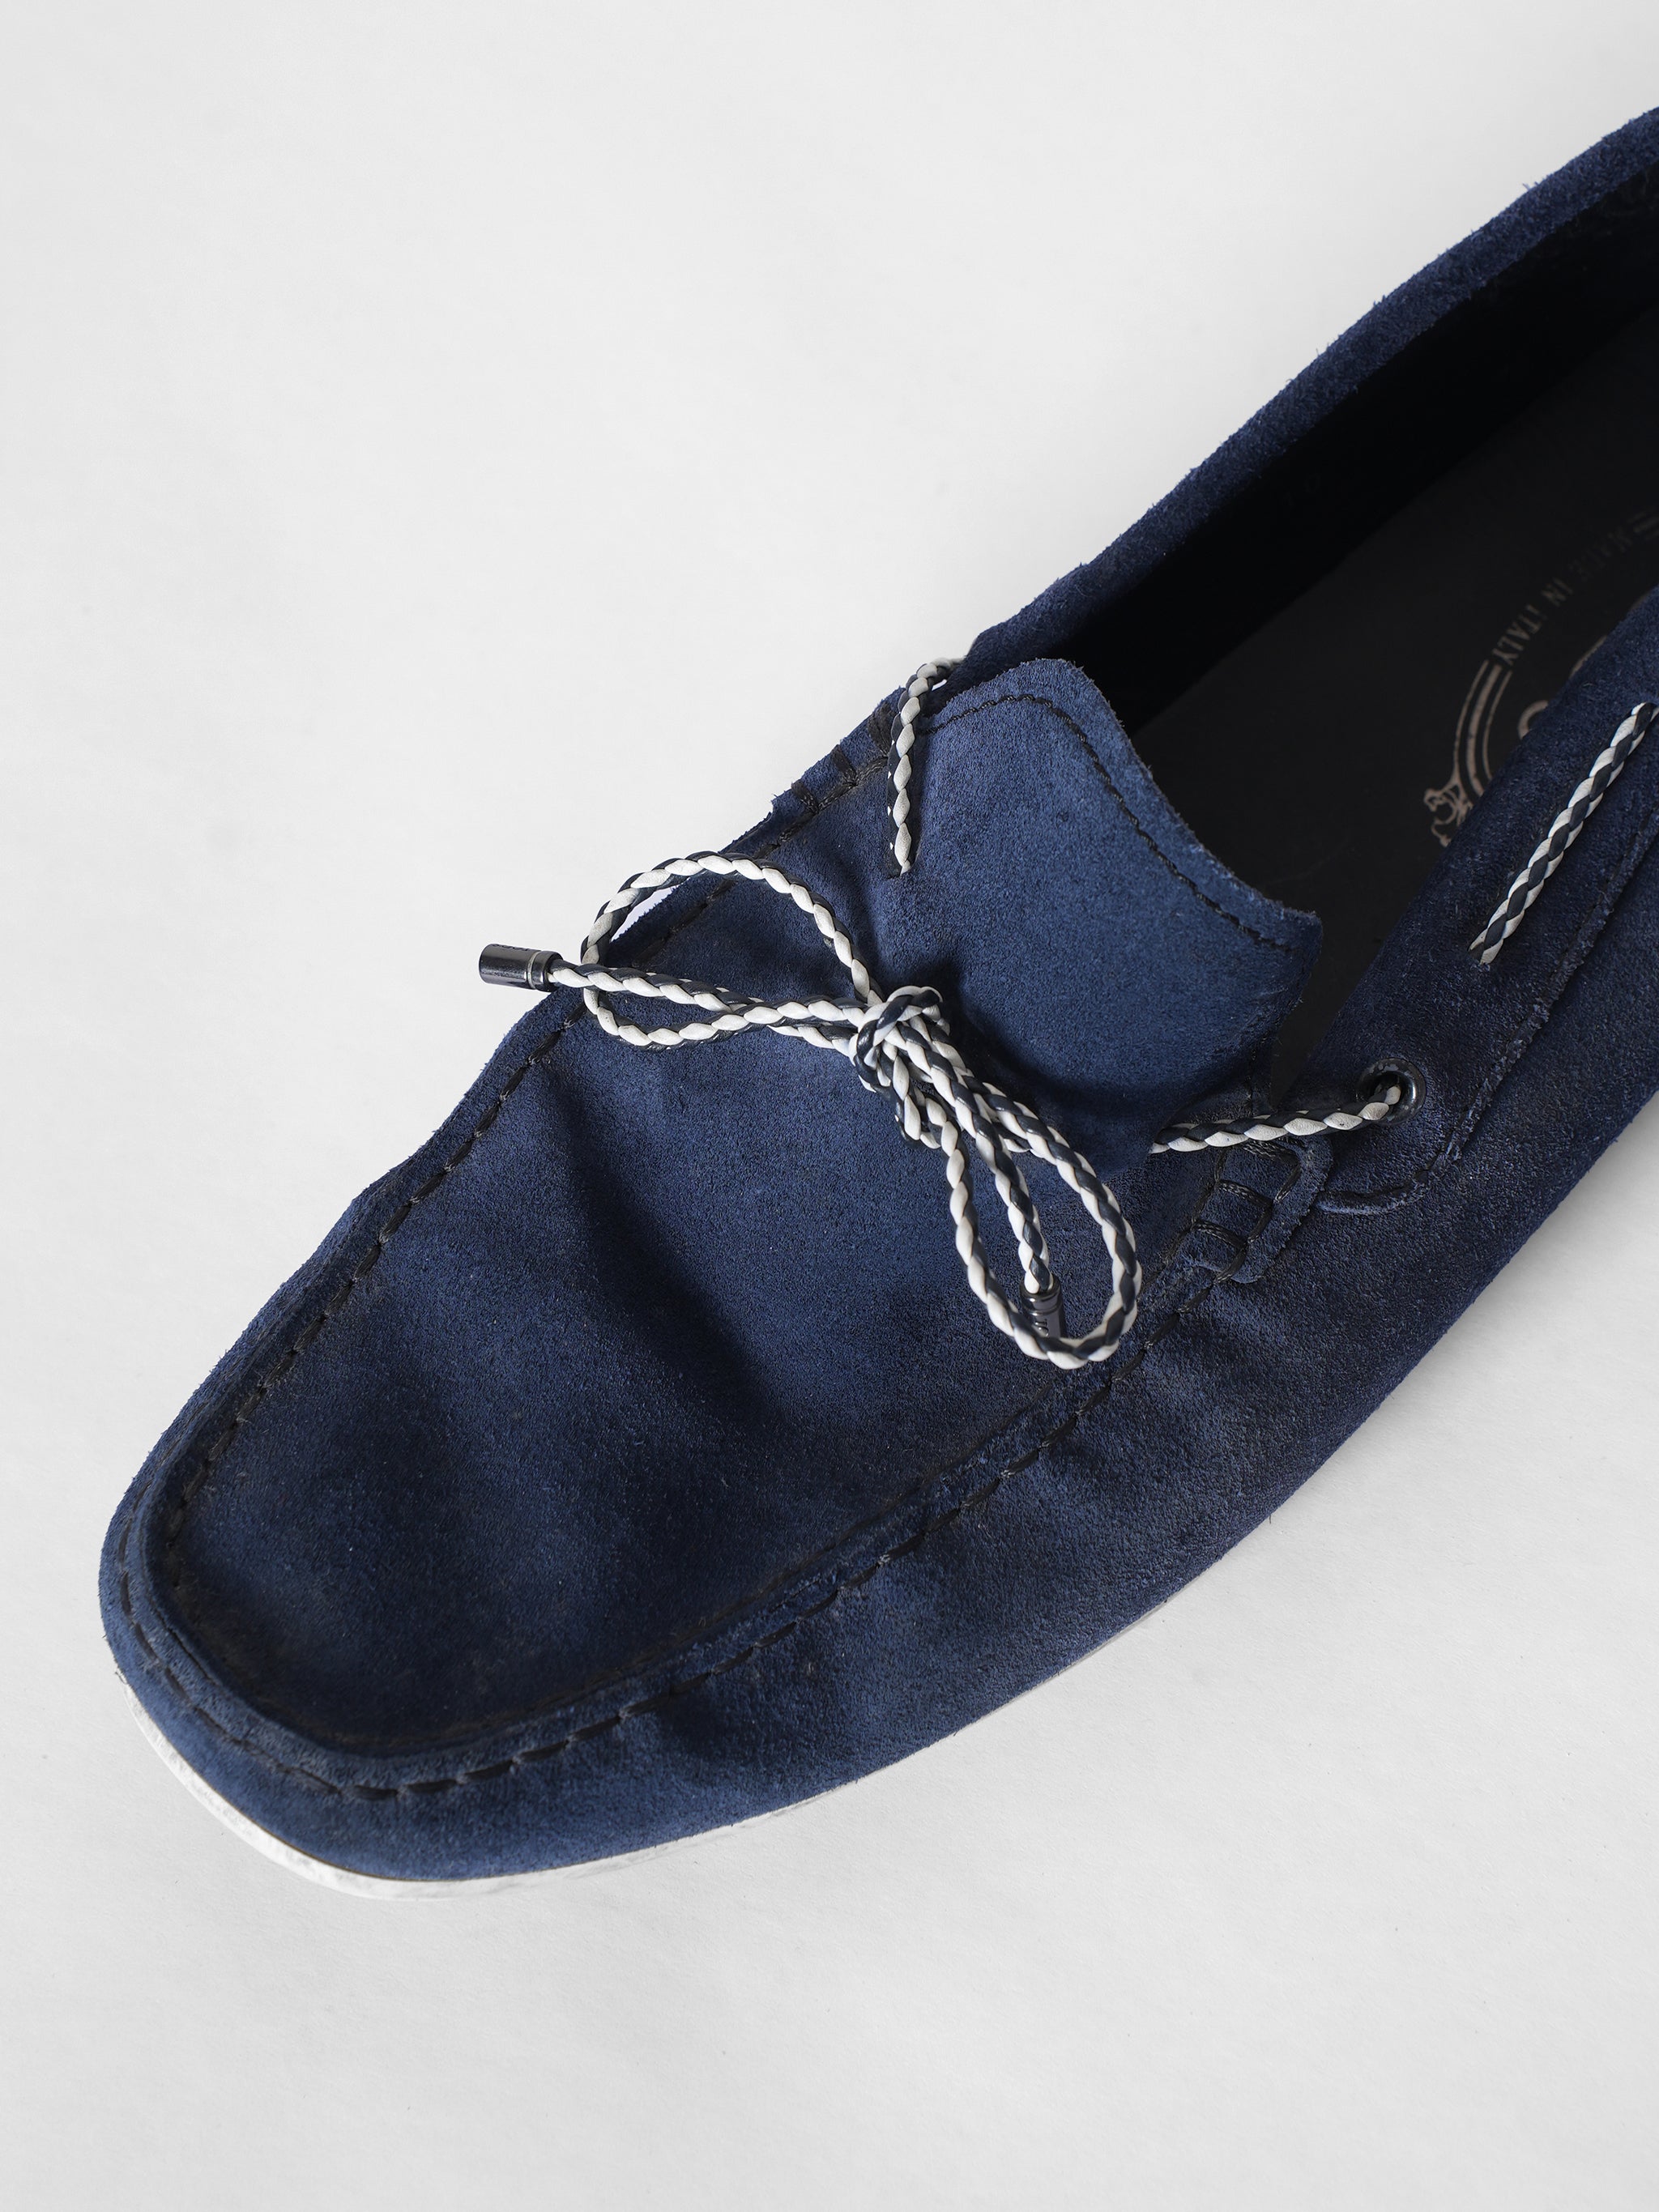 Tods Blue Lace Up Loafers